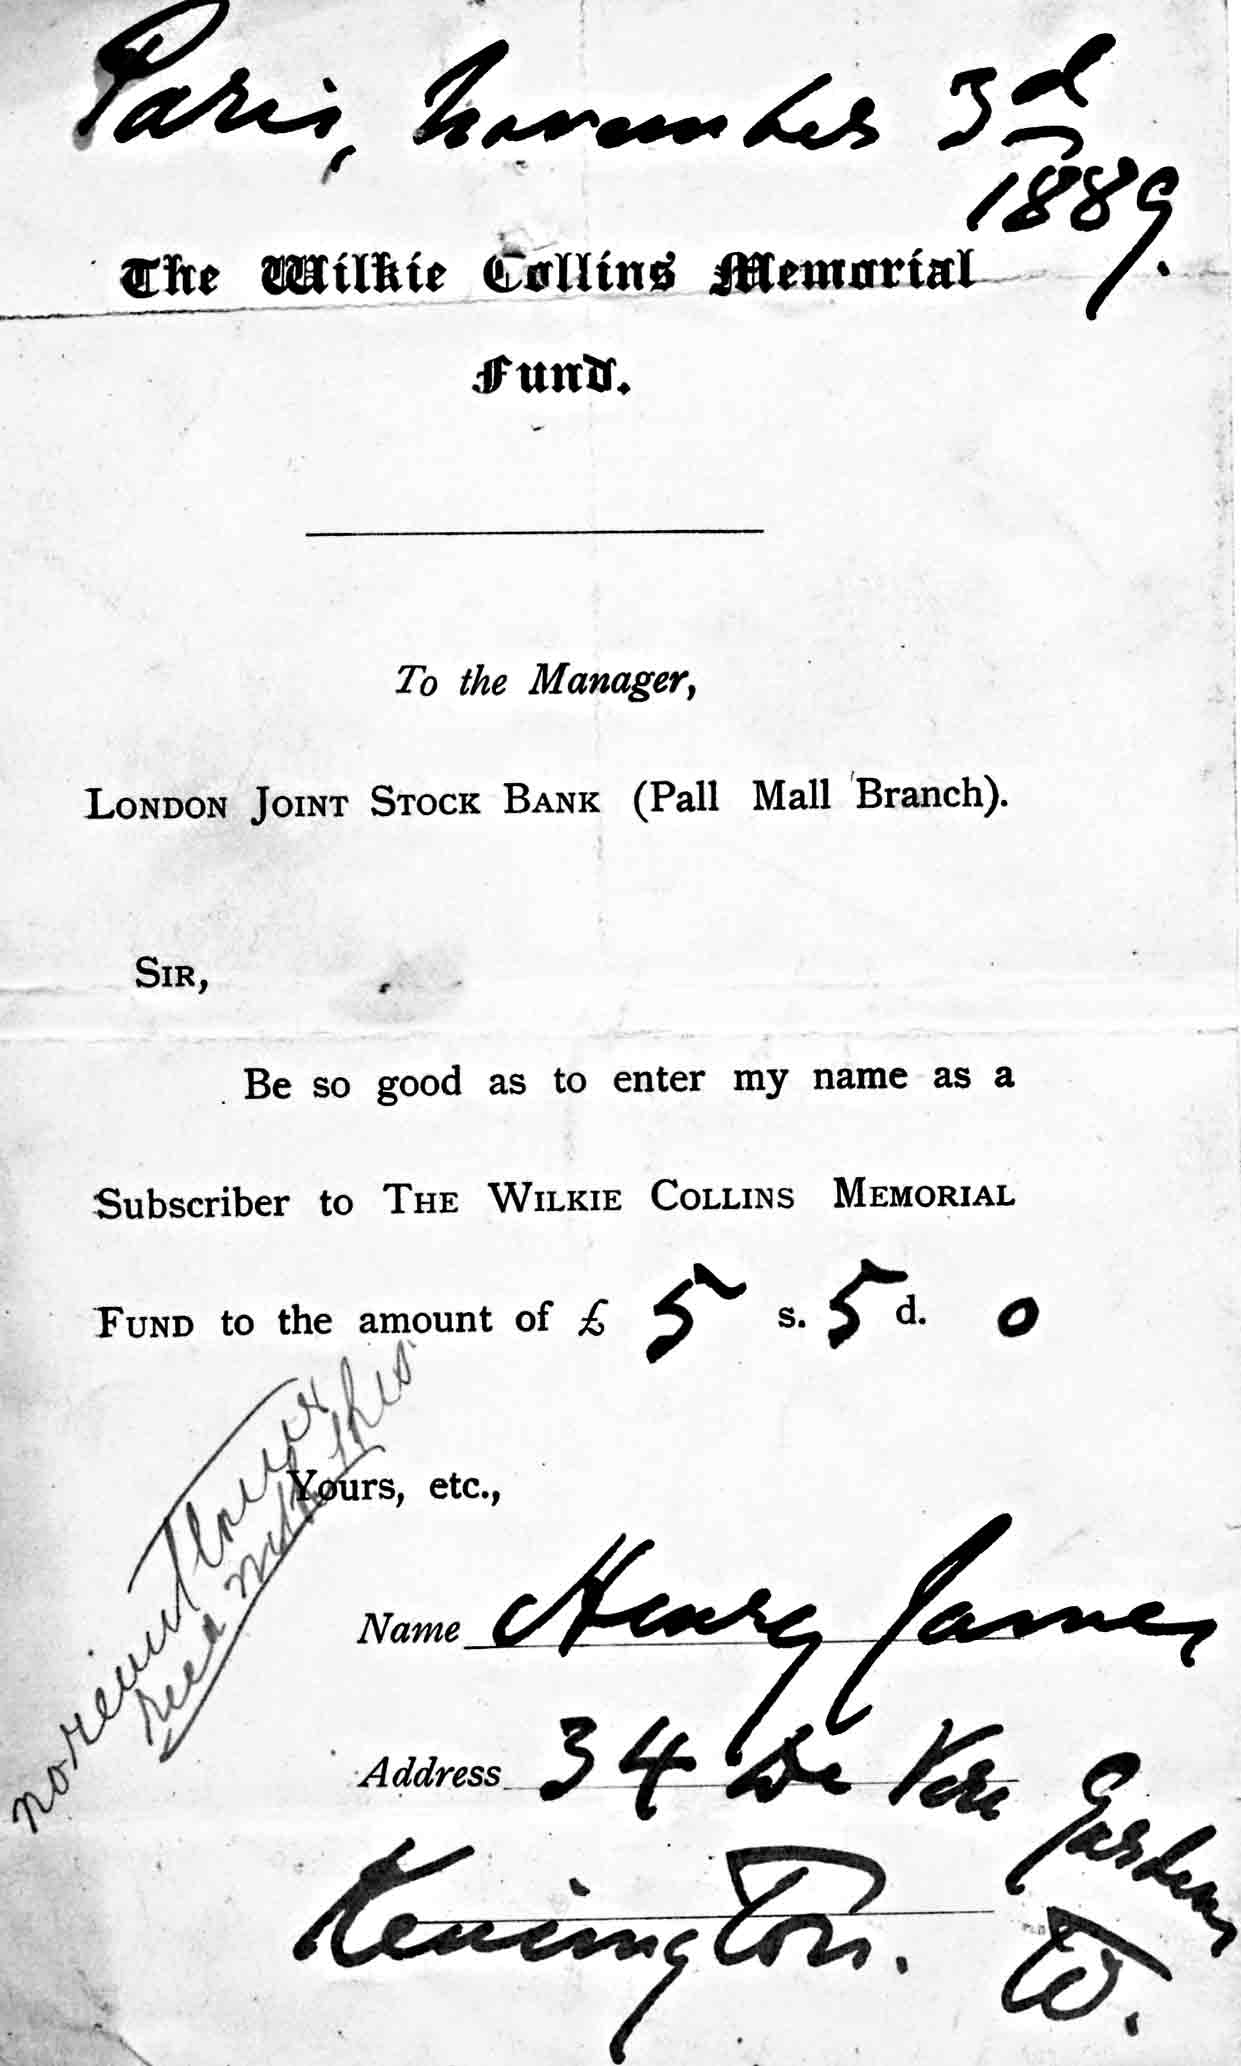 The Wilkie Collins Memorial Fund - donation from Henry James.